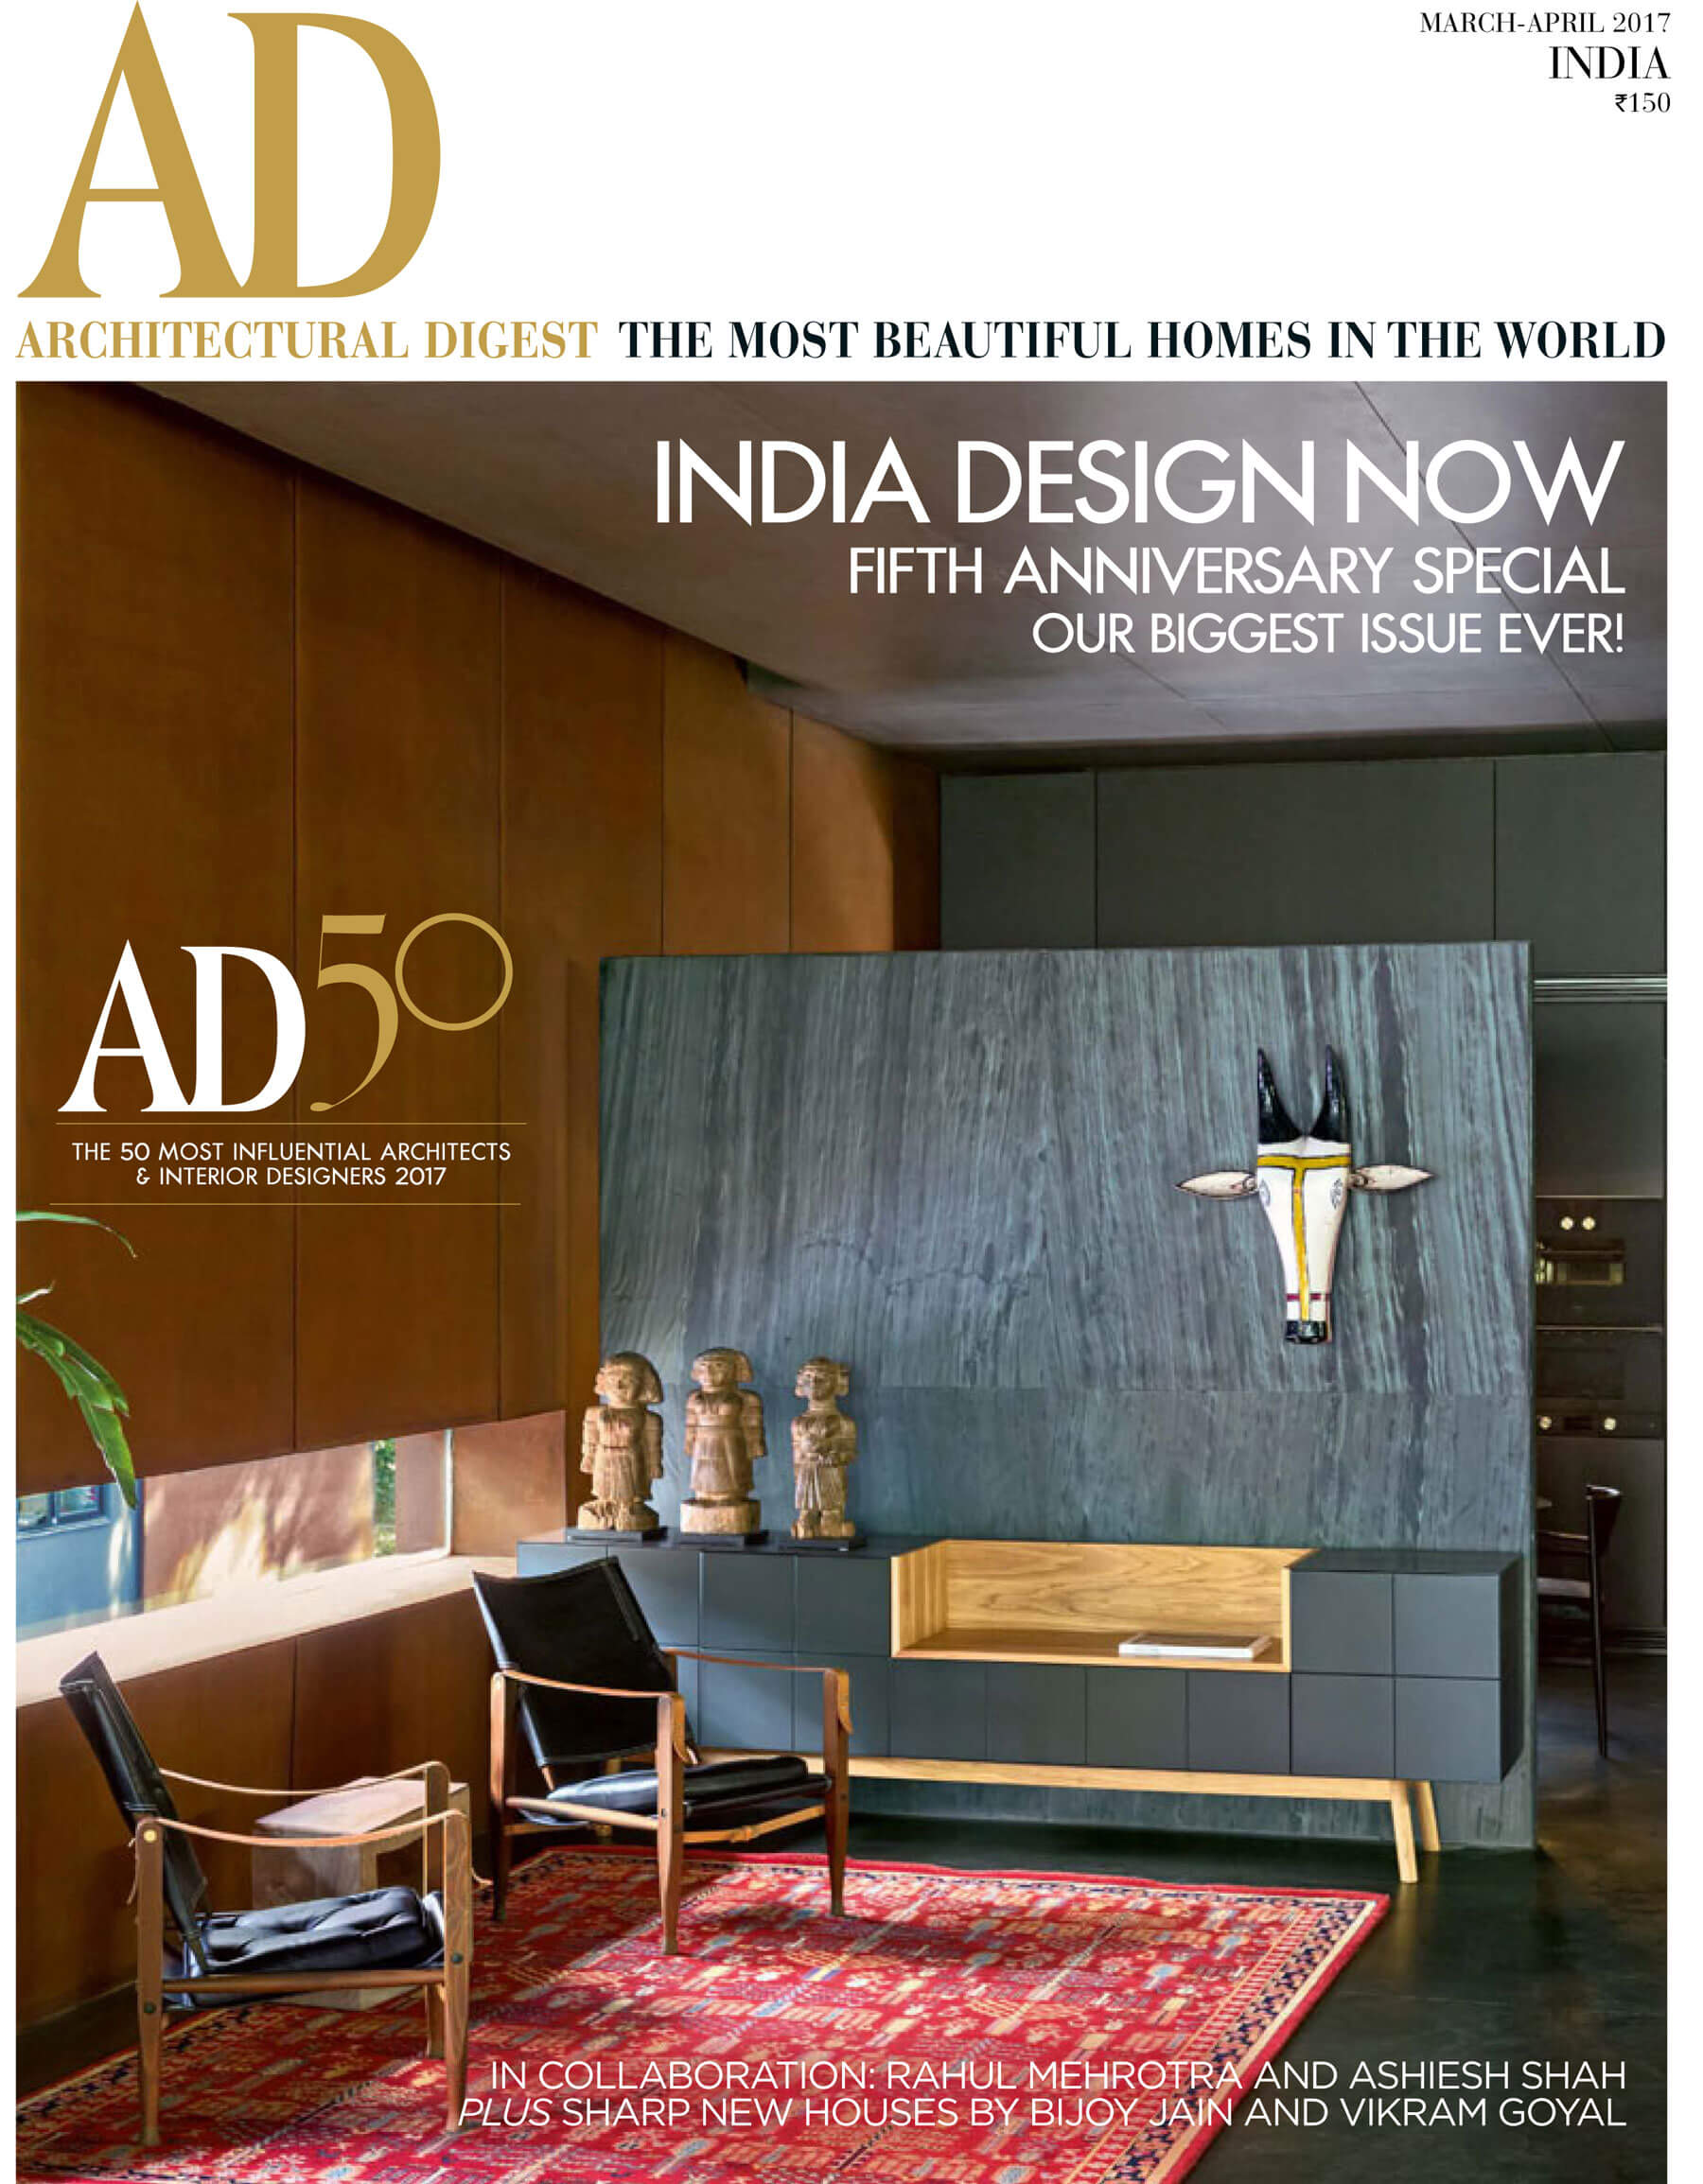 lijo-reny-architects-once-again-becomes-one-among-ad50-indias-50-most-influential-names-in-architecture-and-design-again-4